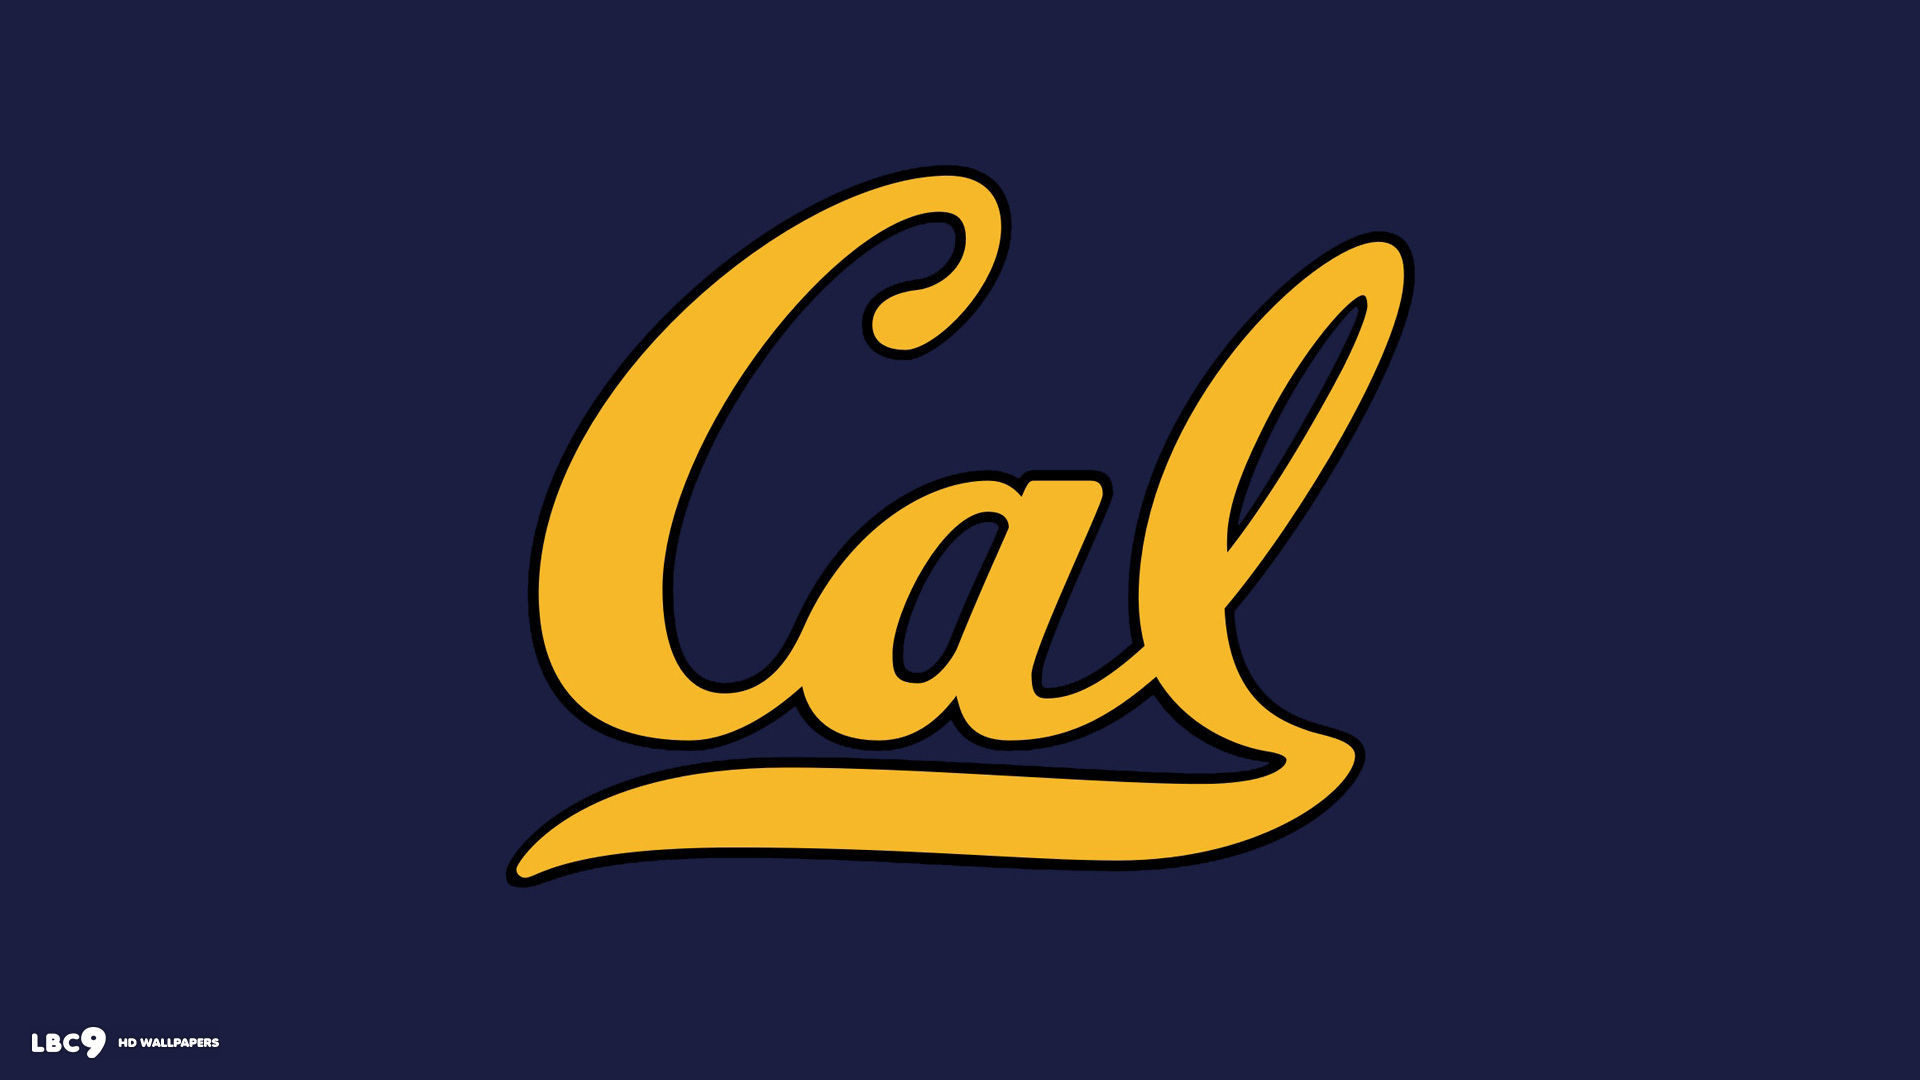 Cal Golden Bears Wallpapers Price Compare 1024Ã576 California Golden Bears  Wallpapers (25 Wallpapers) | Adorable Wallpapers | Wallpapers | Pinterest |  …